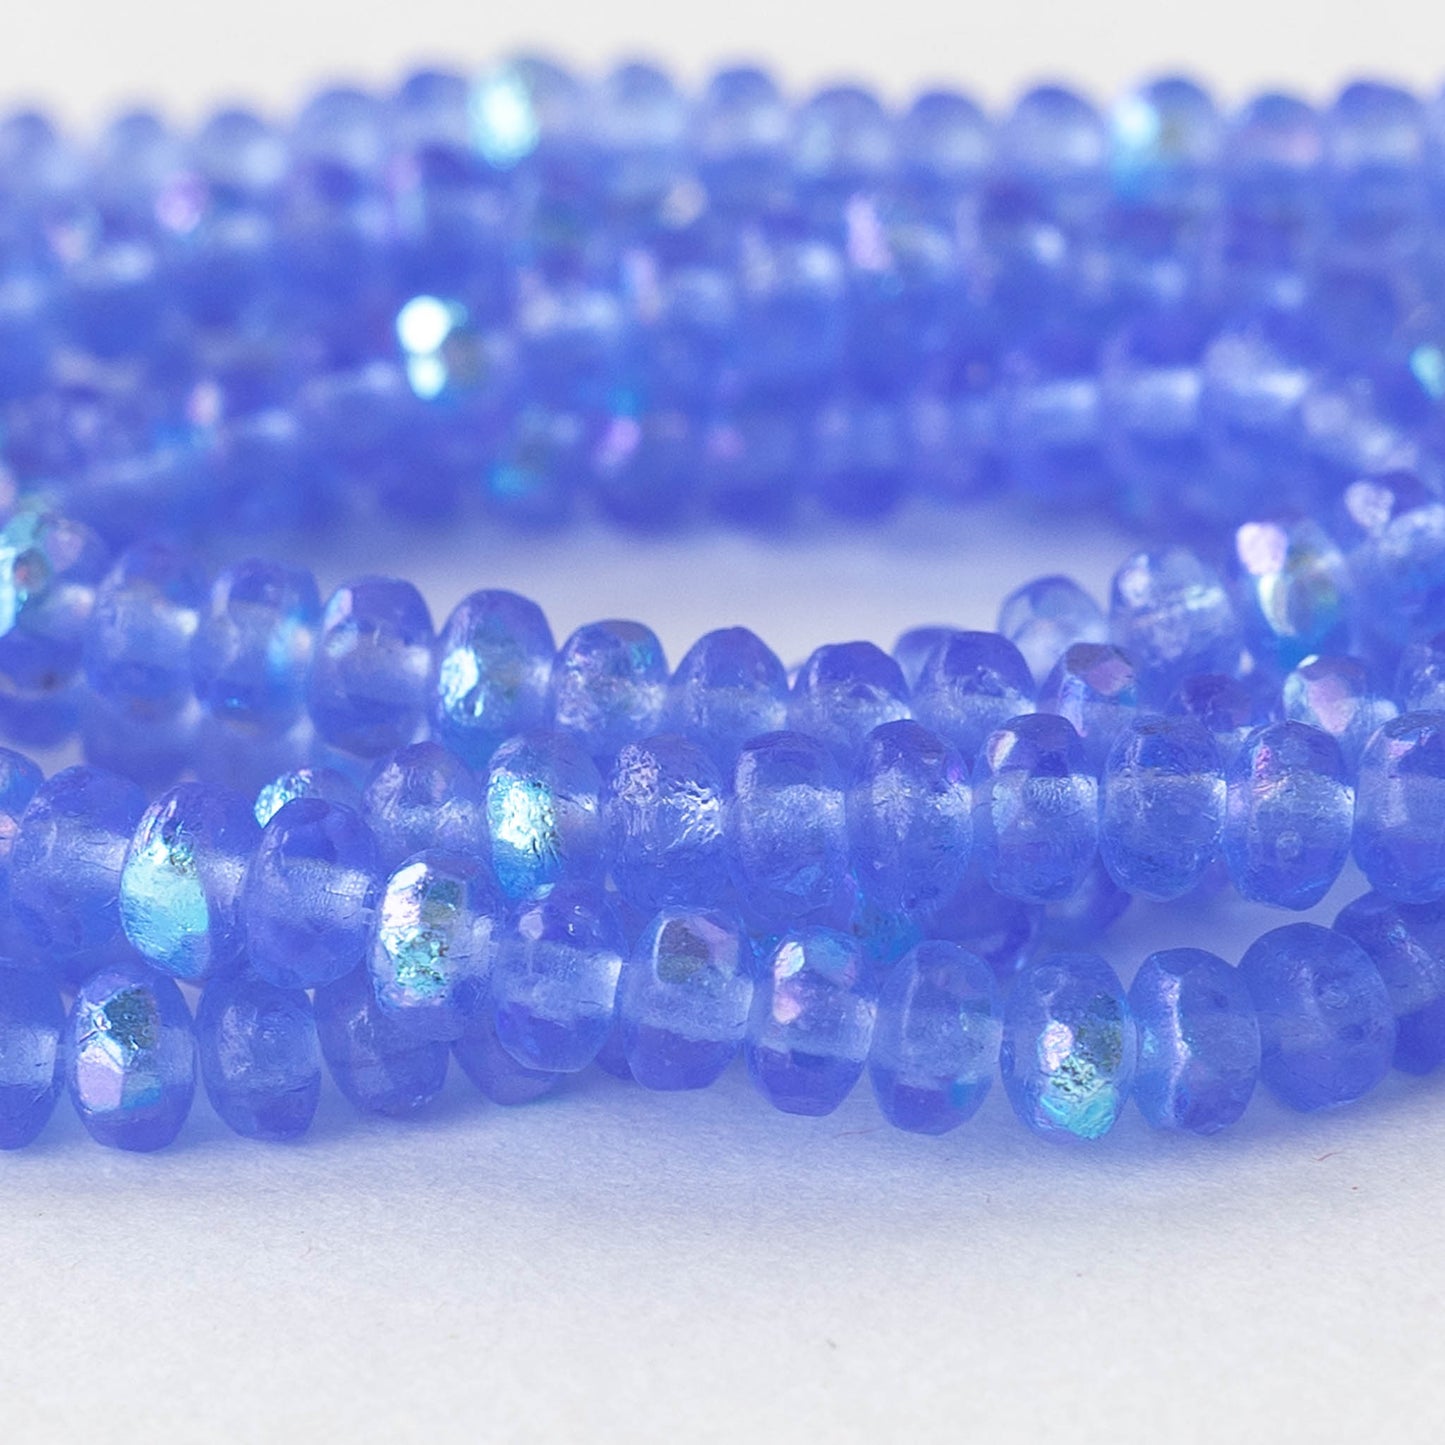 3x4mm Rondelle Beads - Etched Cornflower Blue AB - 10 beads